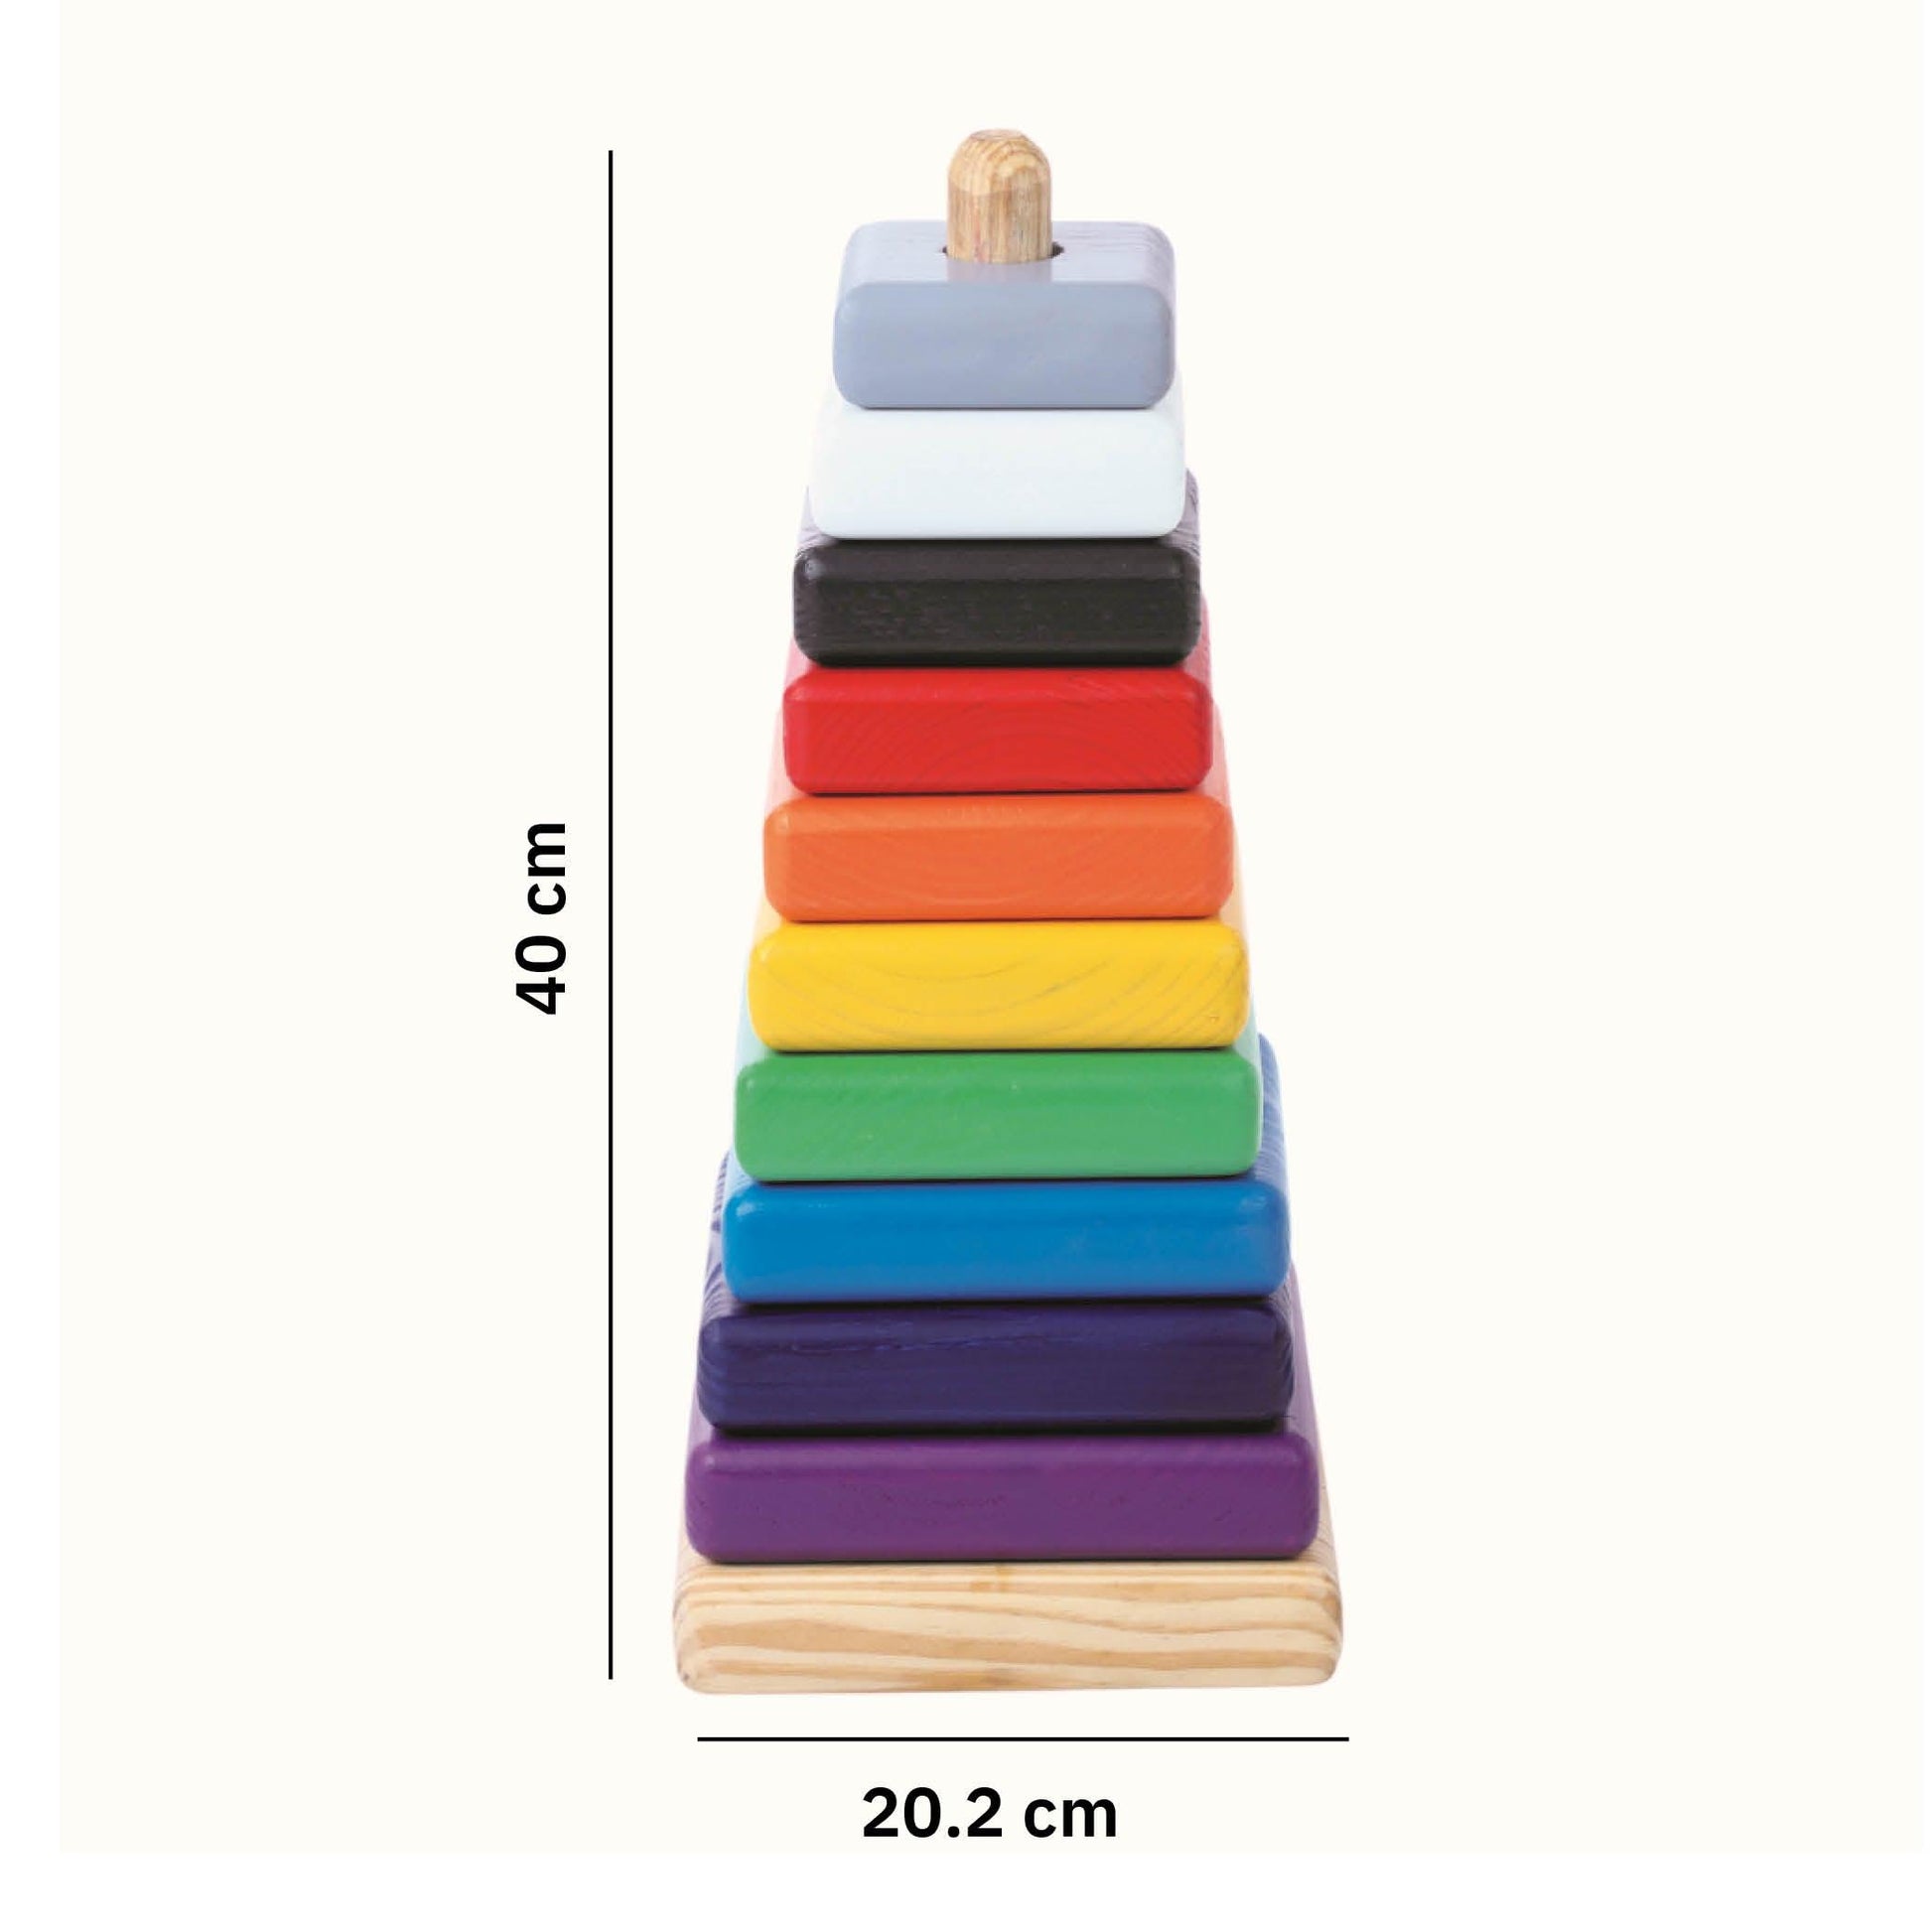 Giant Stacking toy-Colored